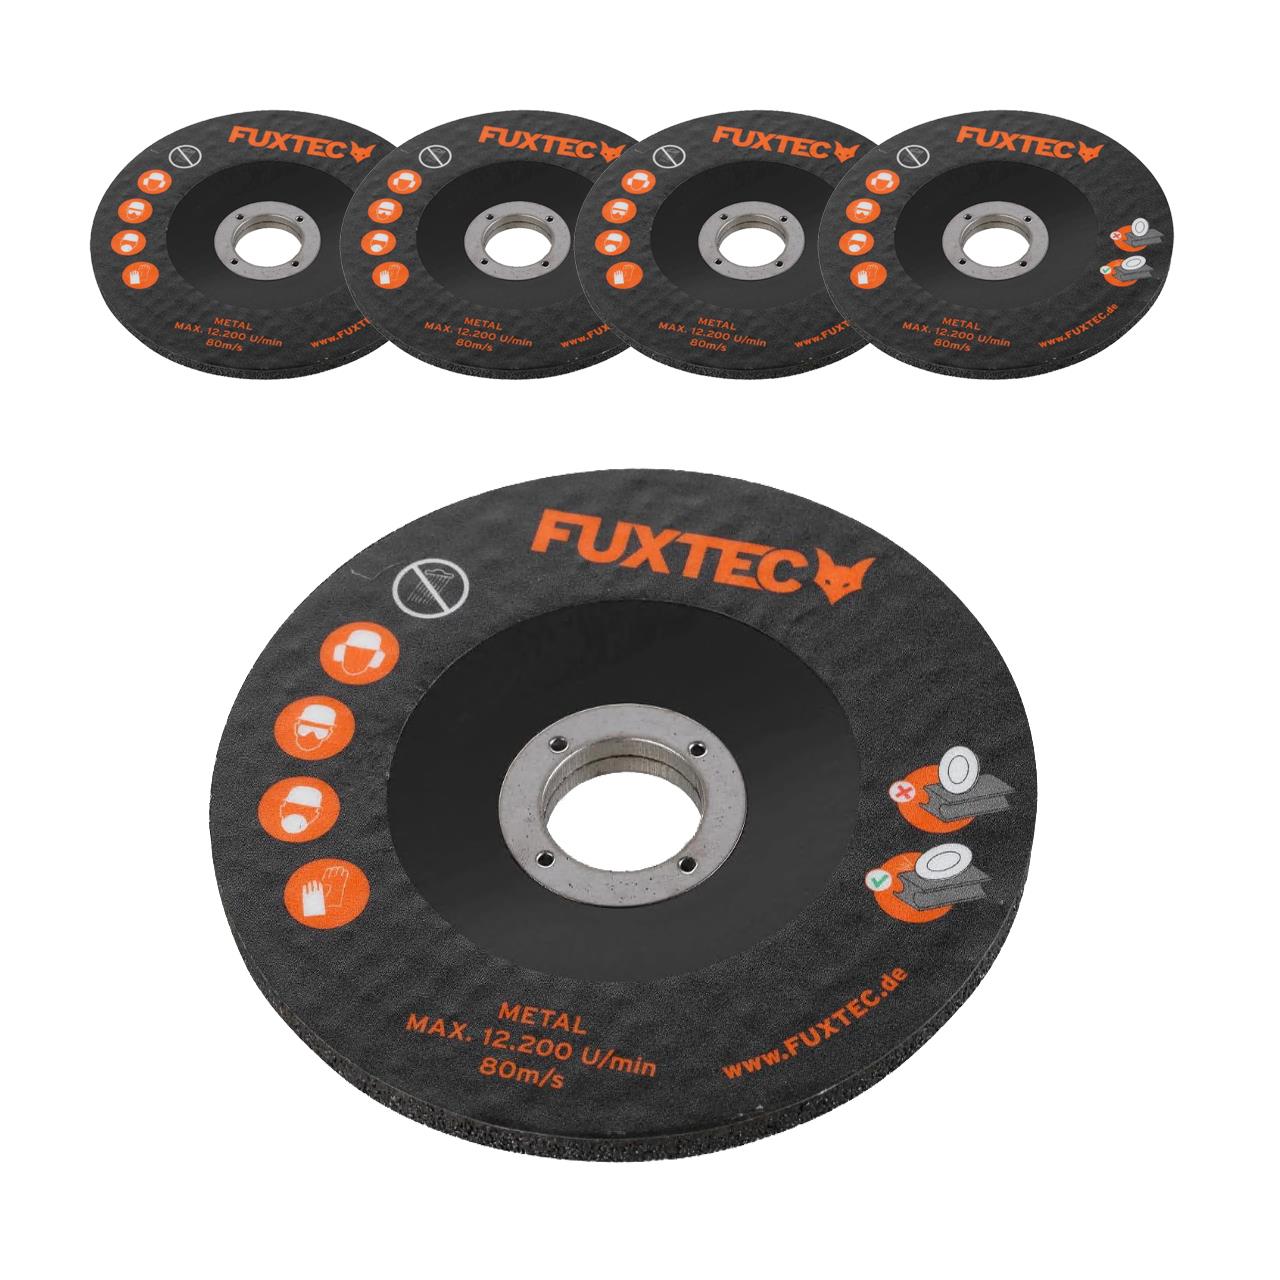 Original FUXTEC grinding discs / roughing discs set of 5 - for cordless 20V angle grinder FX-E1WS20